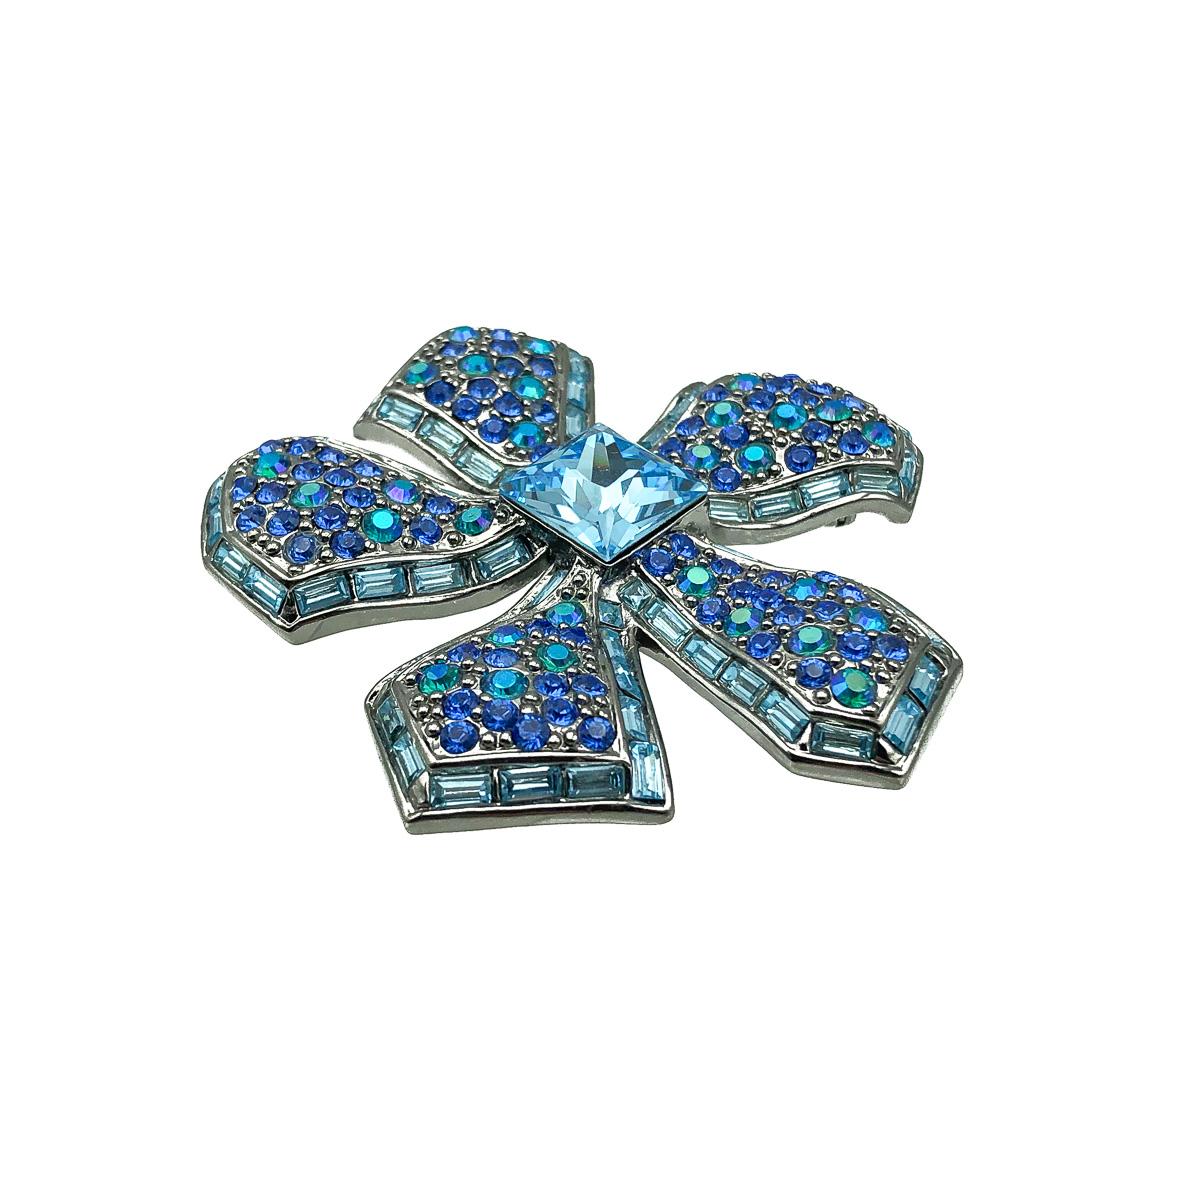 A ultra pretty Givenchy Flower Brooch. Crafted in blackened silver tone metal and set with a stunning array of fancy cut blue crystals. Very good condition, signed, approx. 6cms. A dazzlingly pretty brooch from the House of Givenchy. 

Established